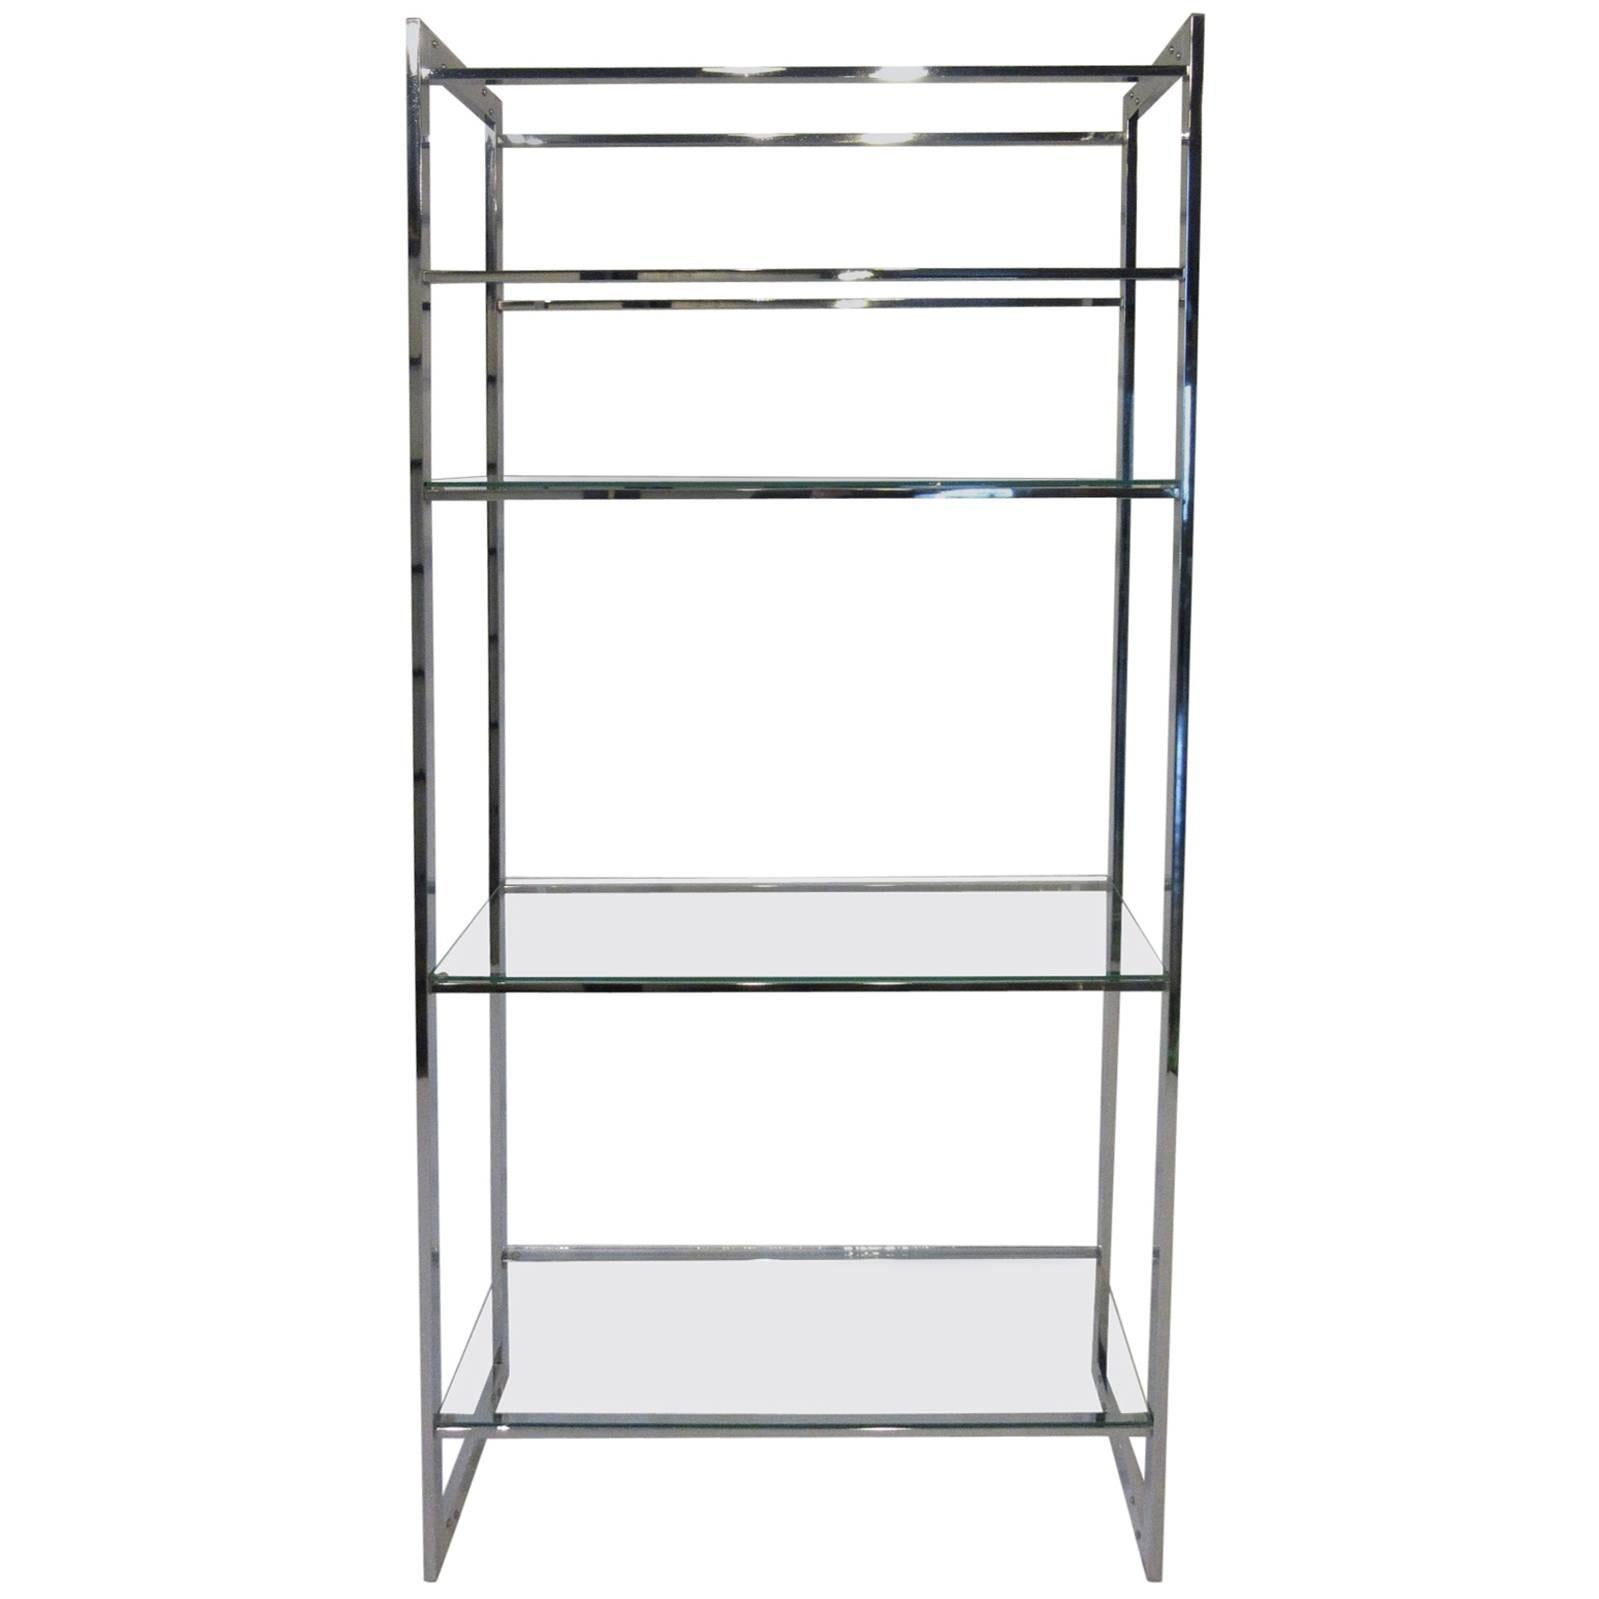 Milo Baughman Styled Chrome and Glass Etagere